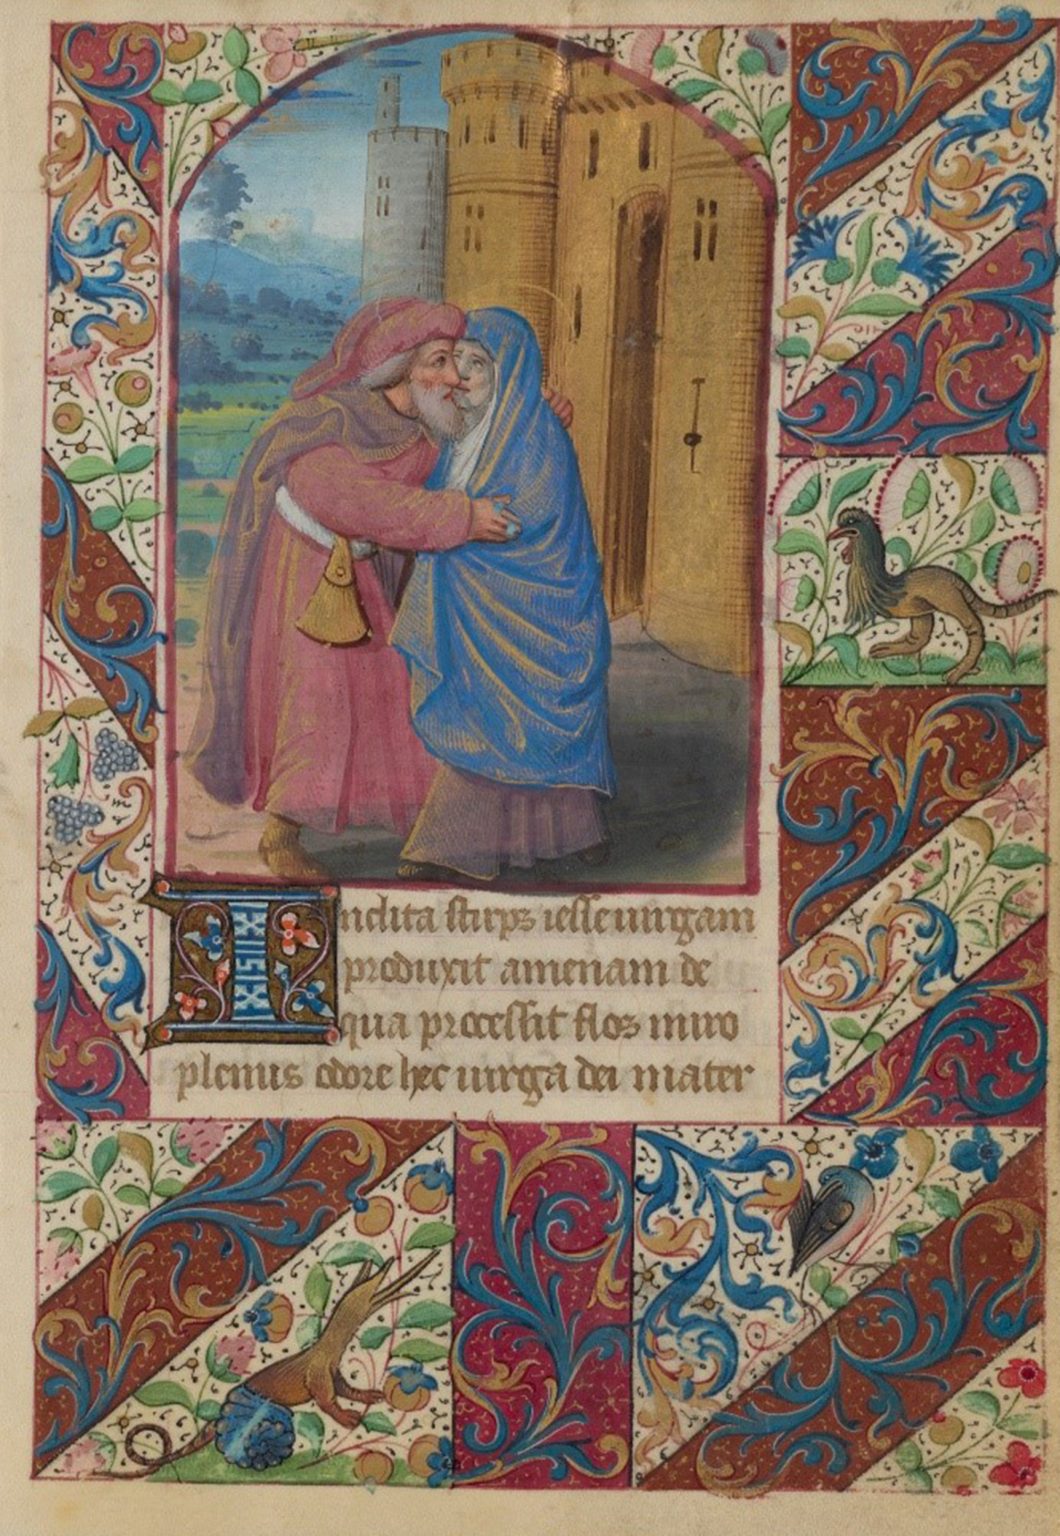 Book of Hours, French, late 15th century, egg tempera and gold on parchment, opening: Hours of Saint Anne (f. 140v.) and Joachim and Saint Anne Embracing at the Golden Gate (f. 141r). Archives and Rare Books.